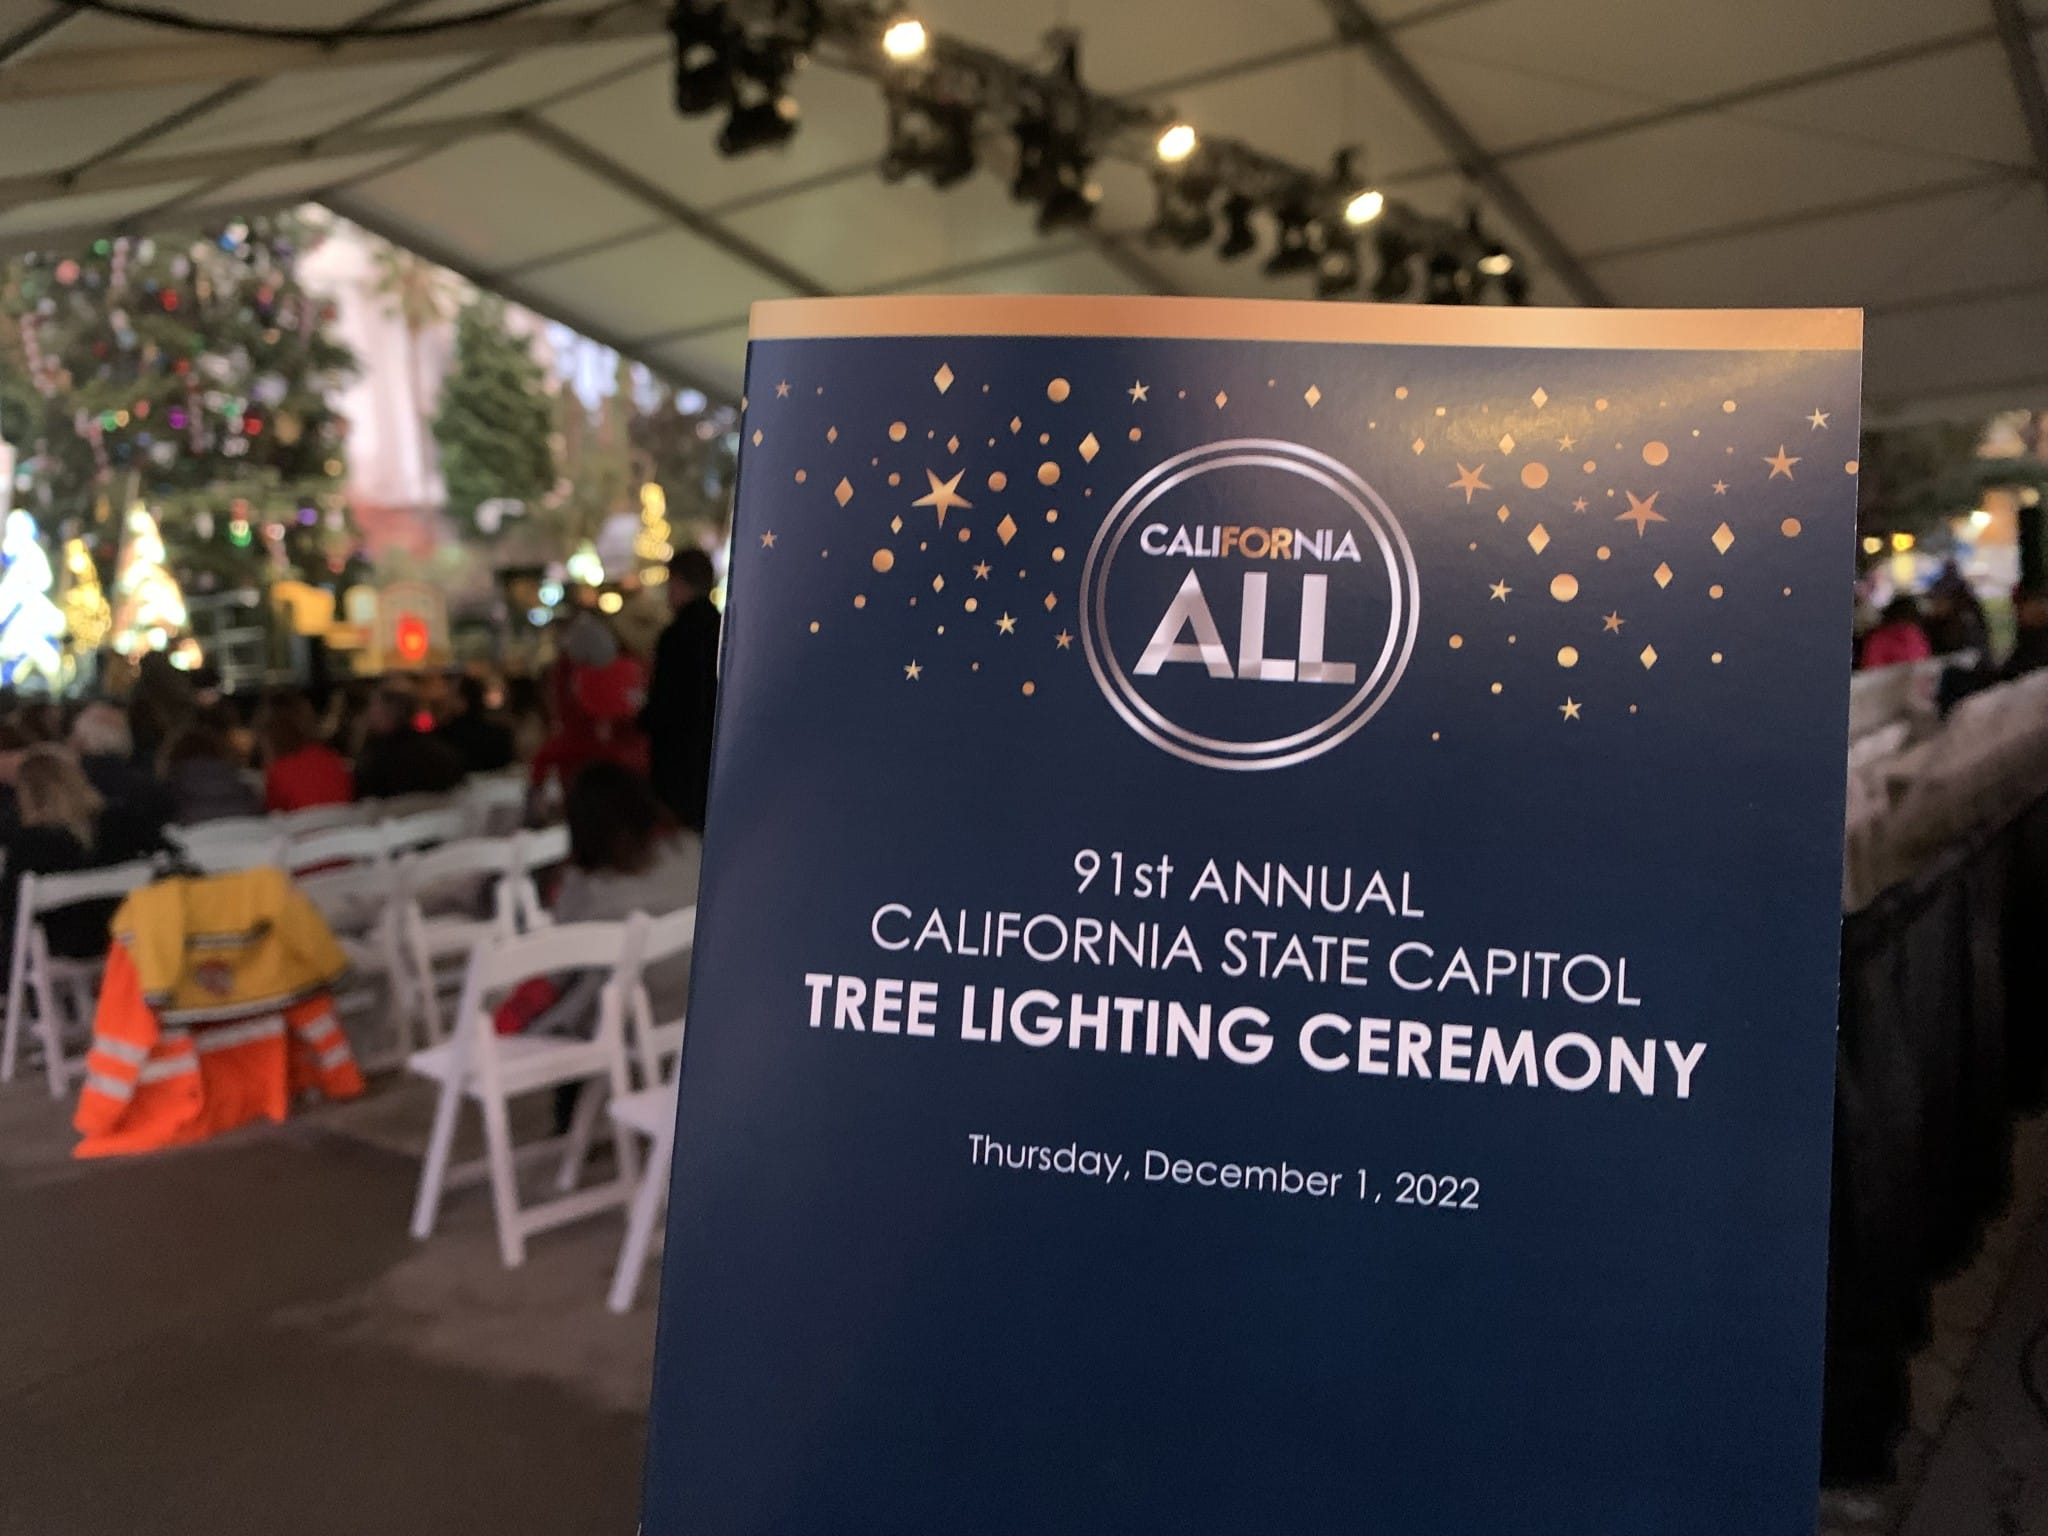 California State Capitol Tree Lighting Ceremony pamphlet